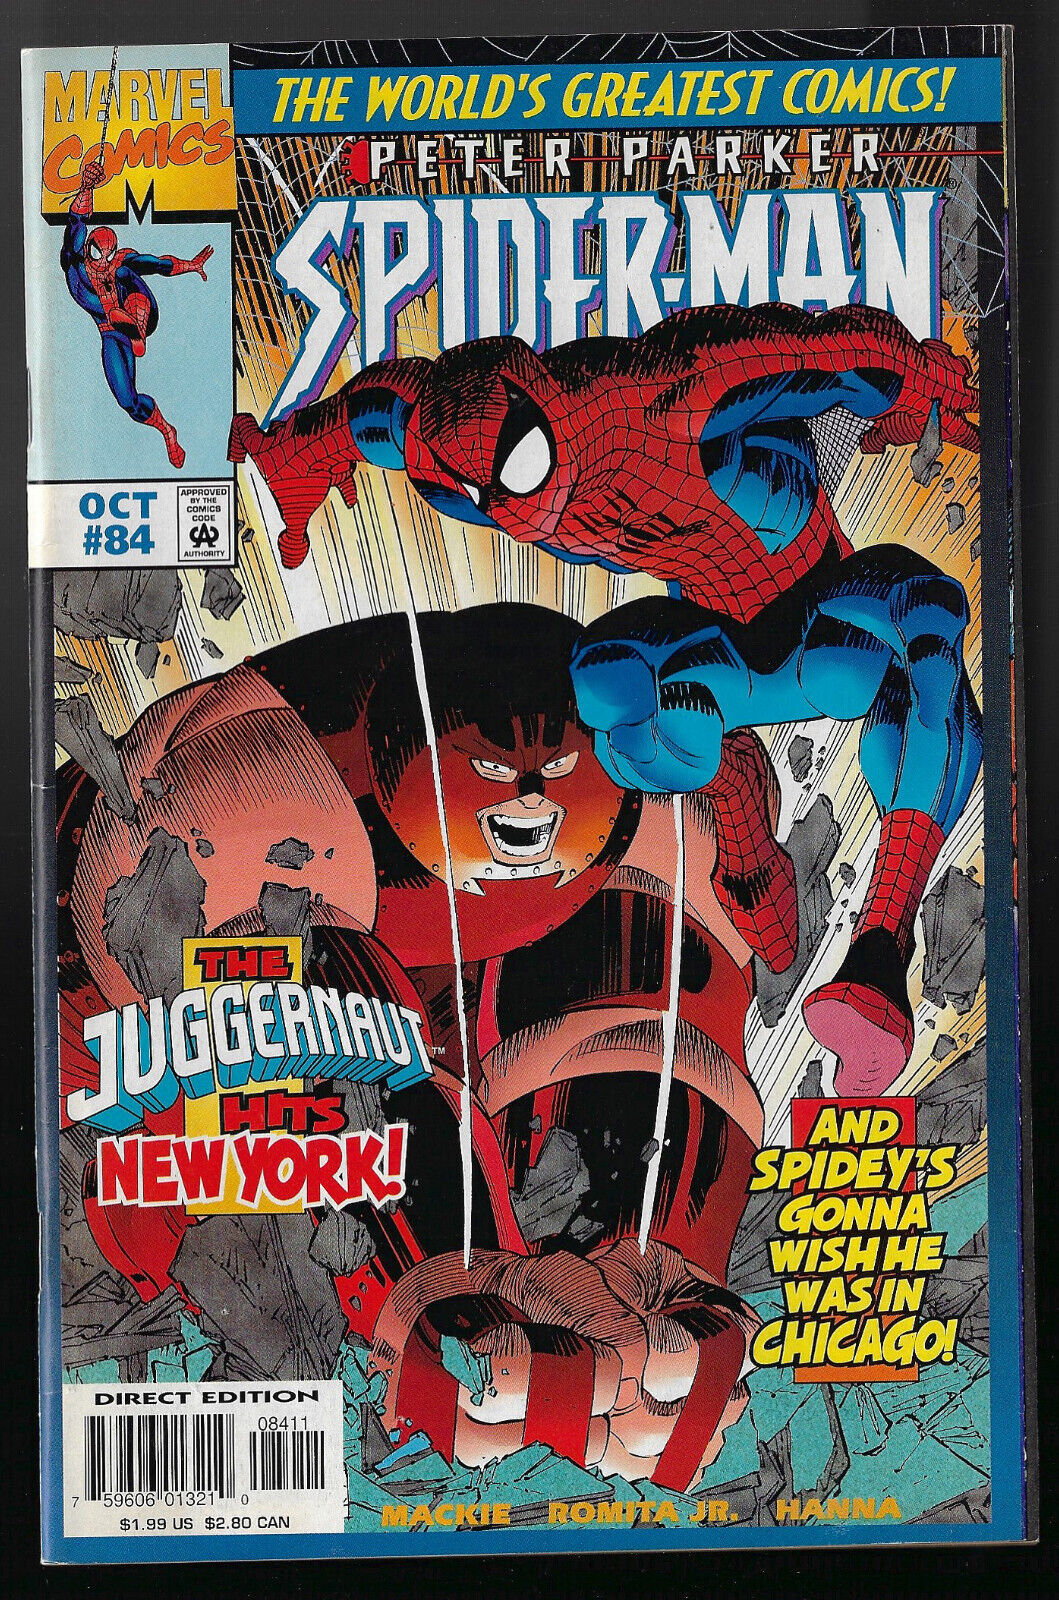 Spider-Man #84  - Marvel, 1997 - $5. ships all your comics